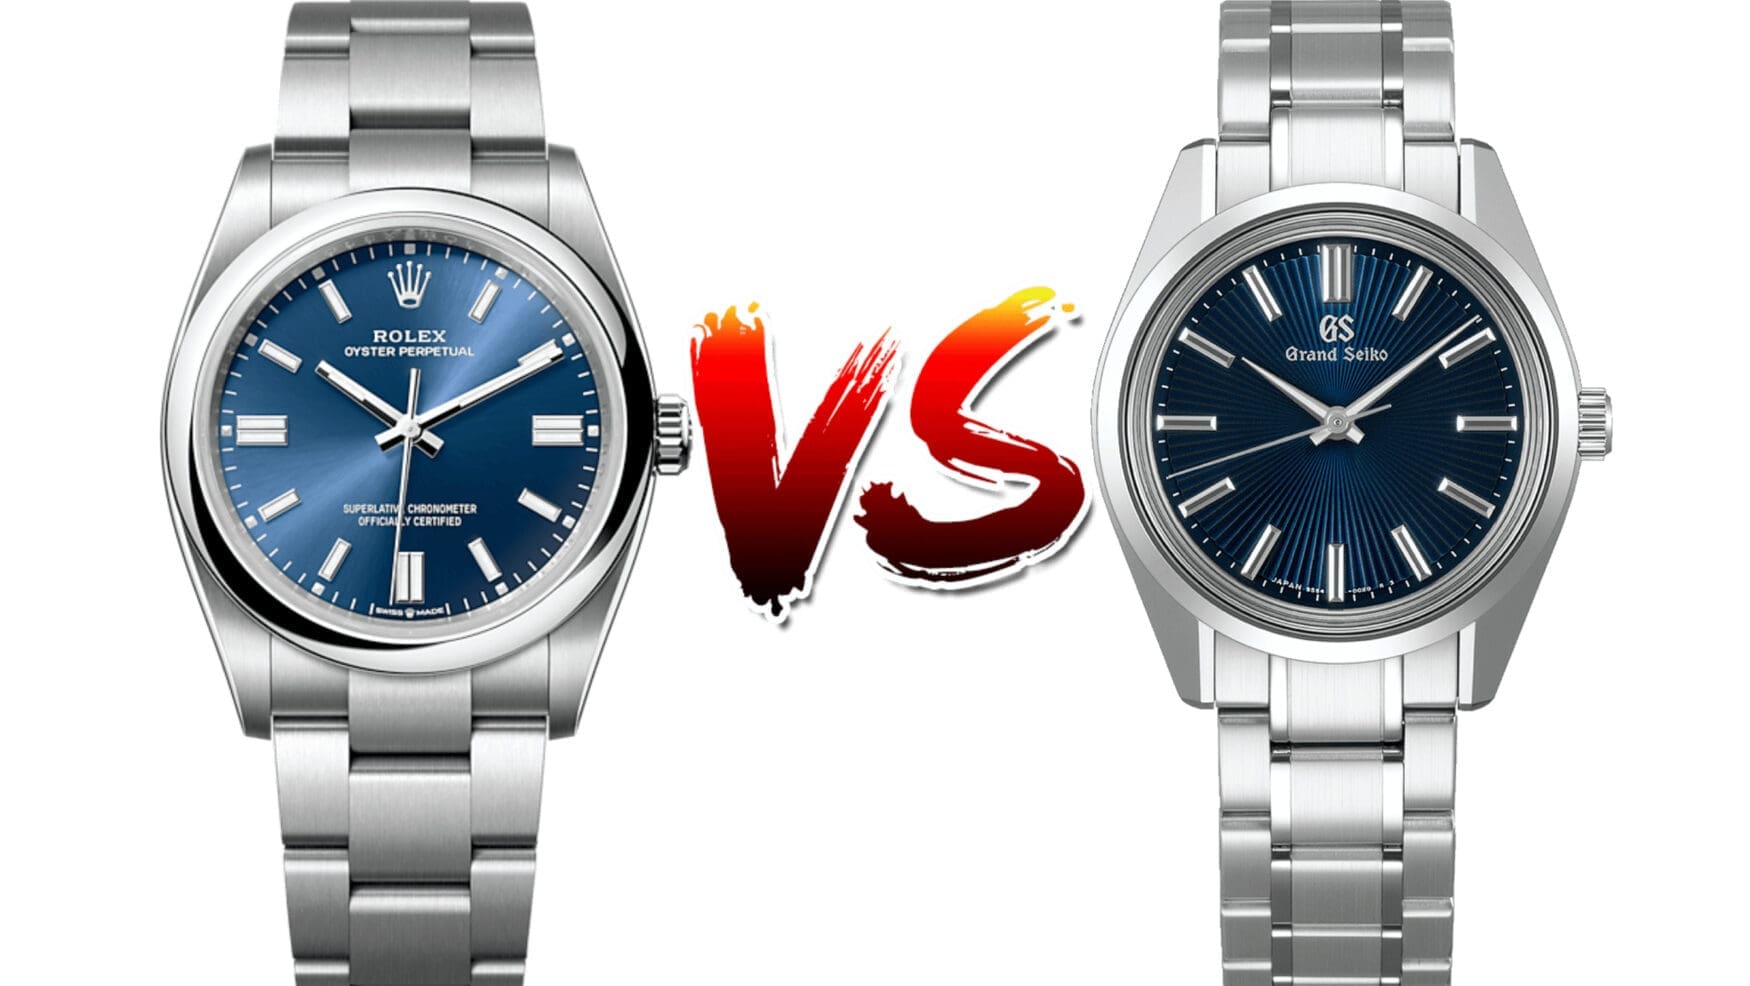 An epic mid-size battle between the Rolex Oyster Perpetual 36 & Grand Seiko SBGW299